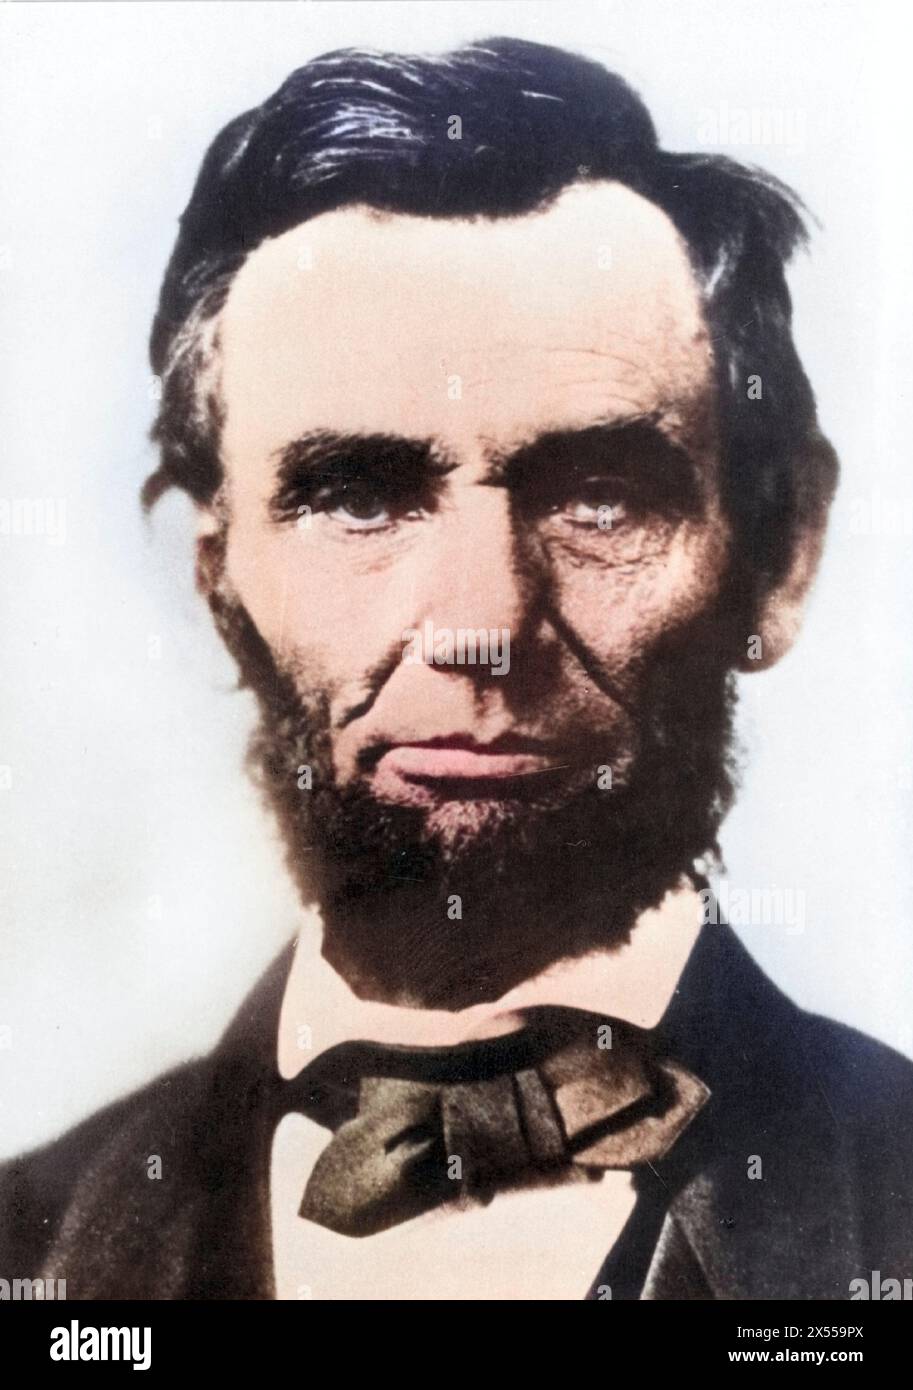 Lincoln, Abraham, 12.2.1809 - 15.4,1865, US-amerikanischer Politiker, 16. Präsident der USA 1861 - 1865, ADDITIONAL-RIGHTS-CLEARANCE-INFO-NOT-AVAILABLE Stockfoto